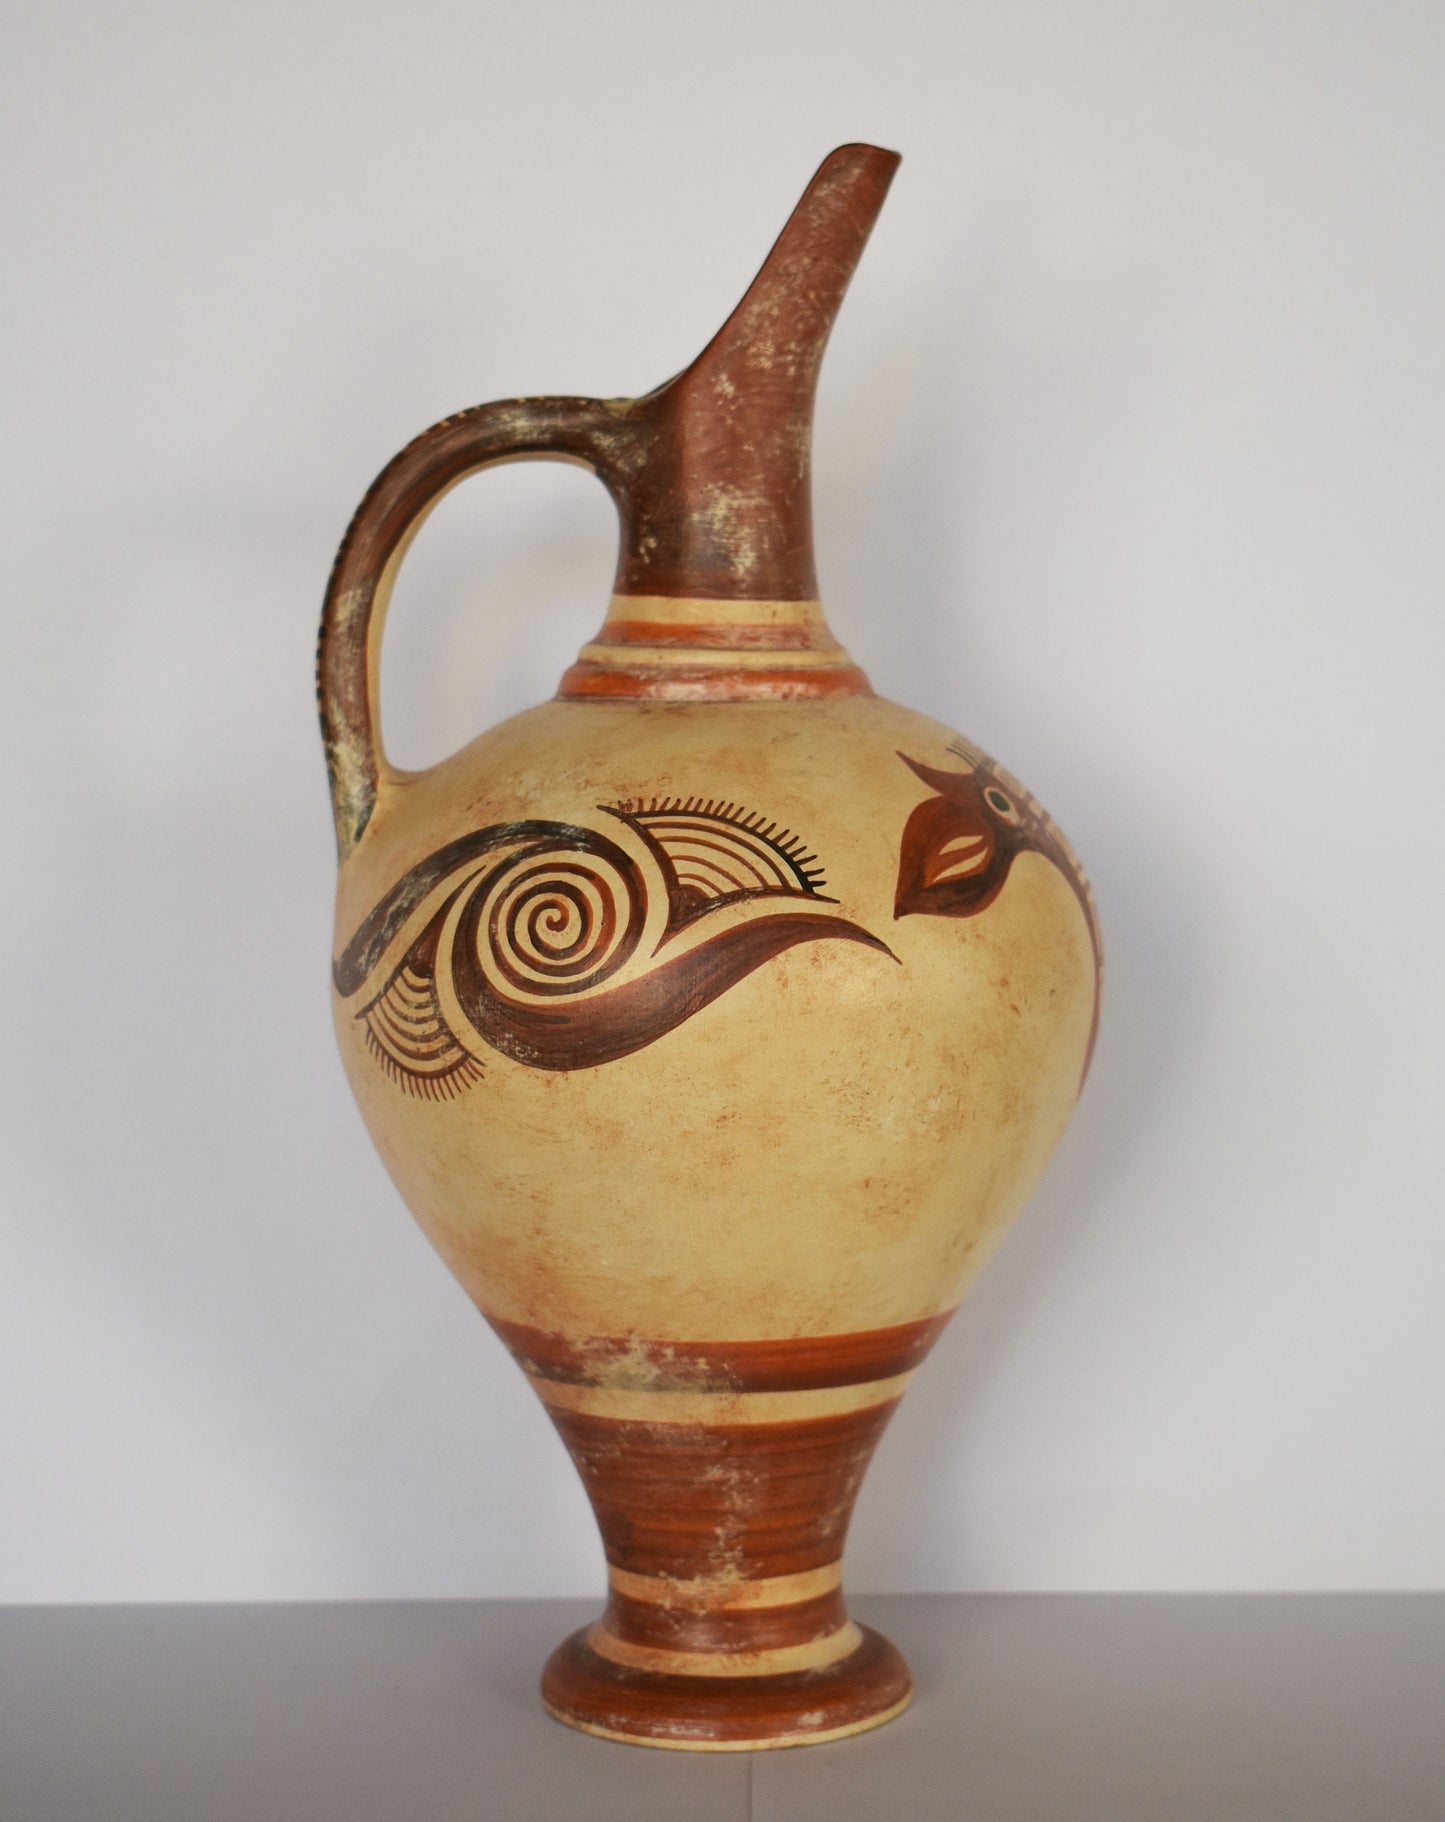 Vessel with Bull and Geometrical Design - Late Helladic I-II Period - 1580-1400 BC - Small - Ceramic Vase